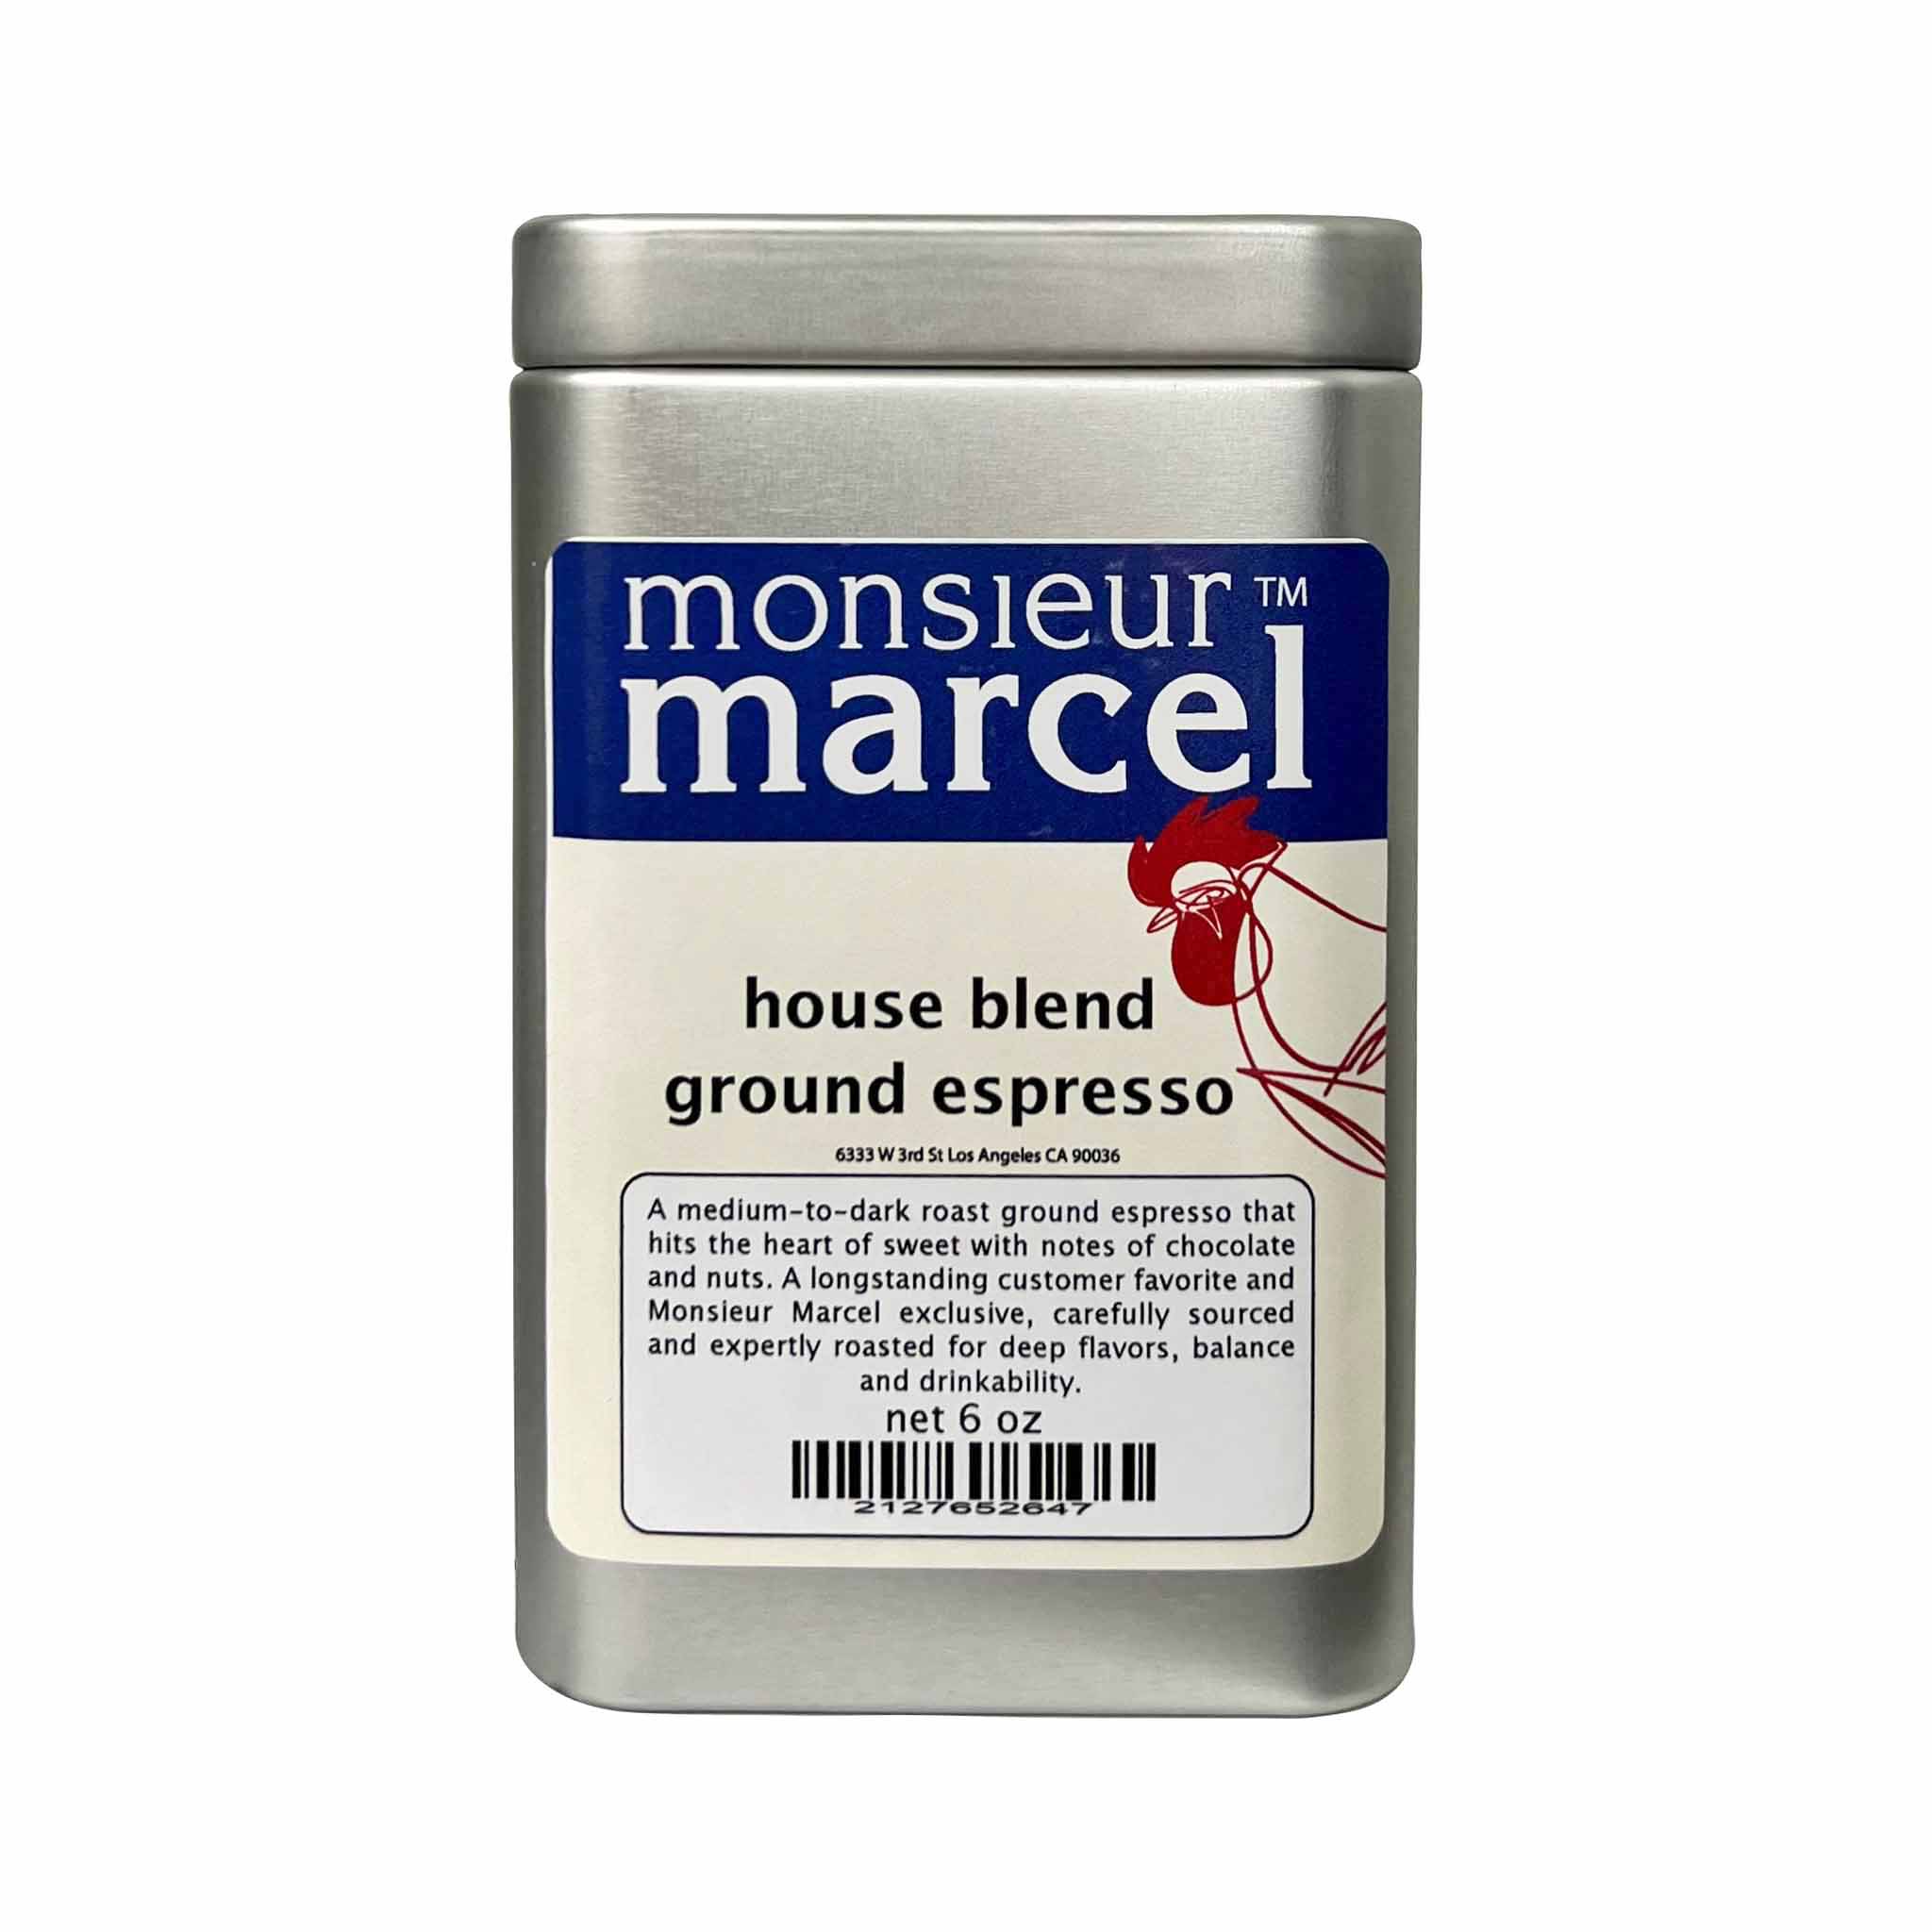 Monsieur Marcel House Blend Ground Espresso in a Tin